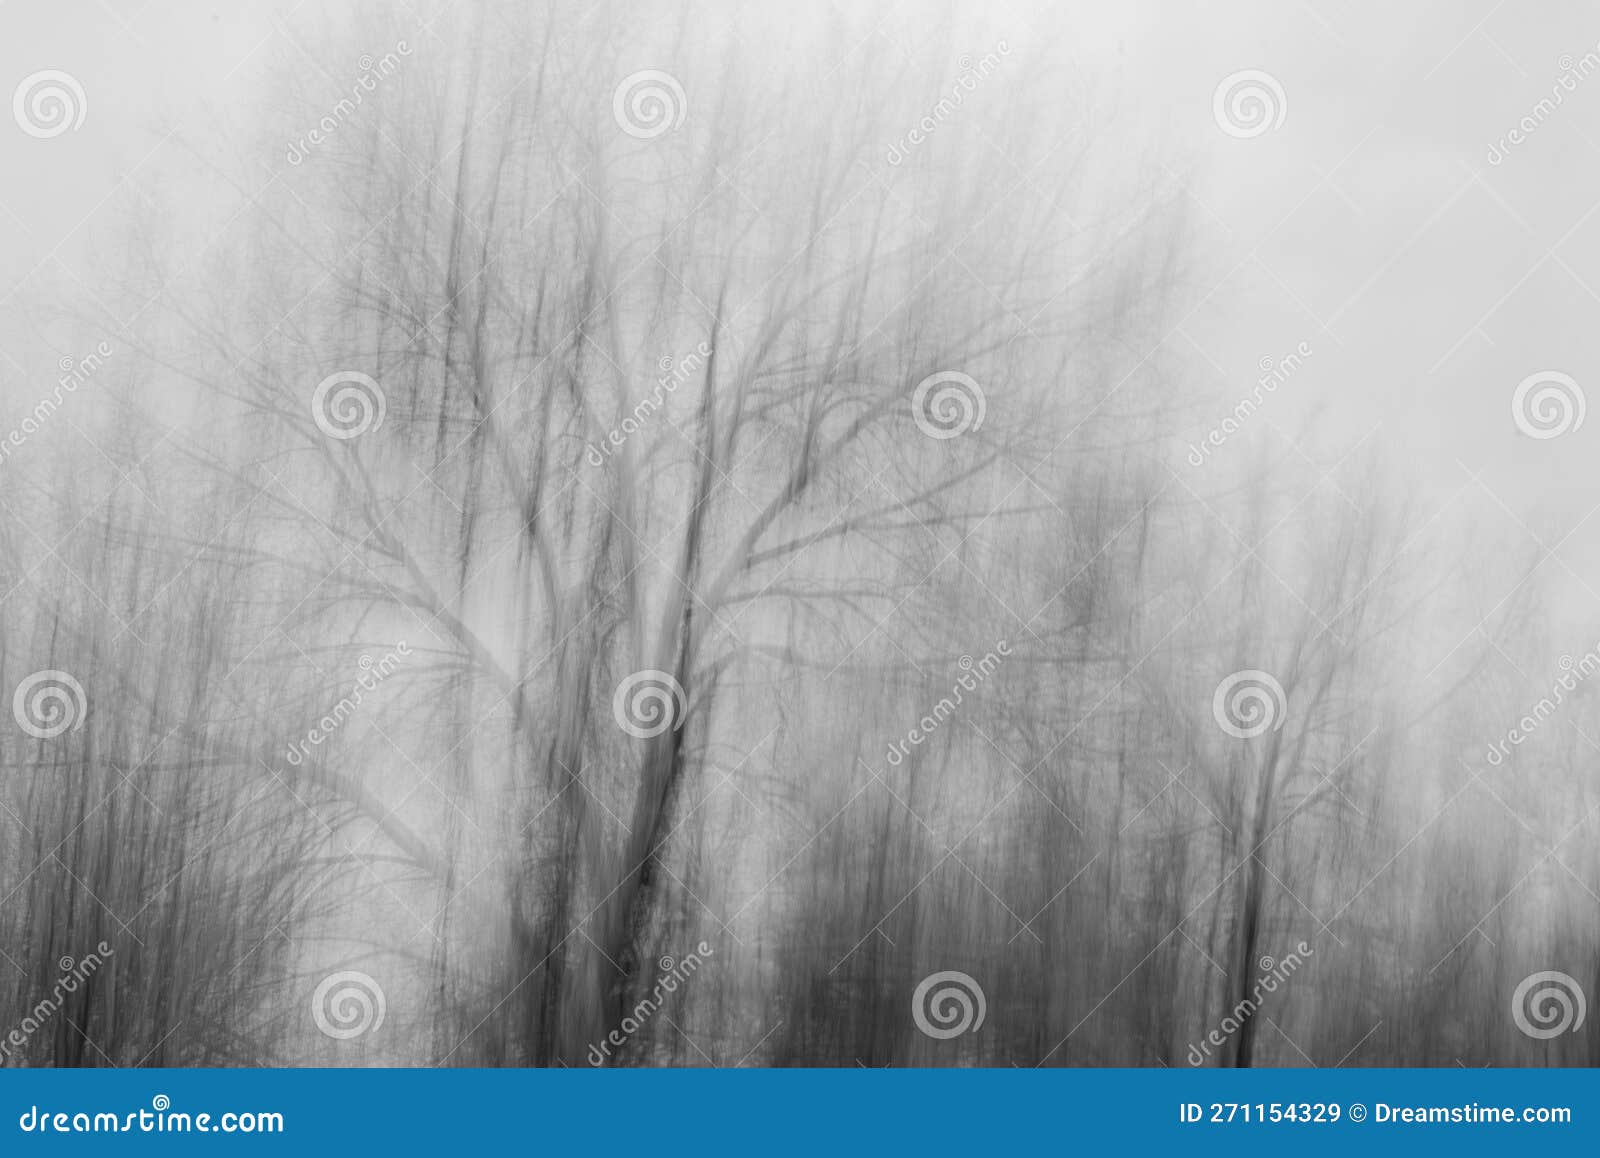 photography of trees in the forest, icm